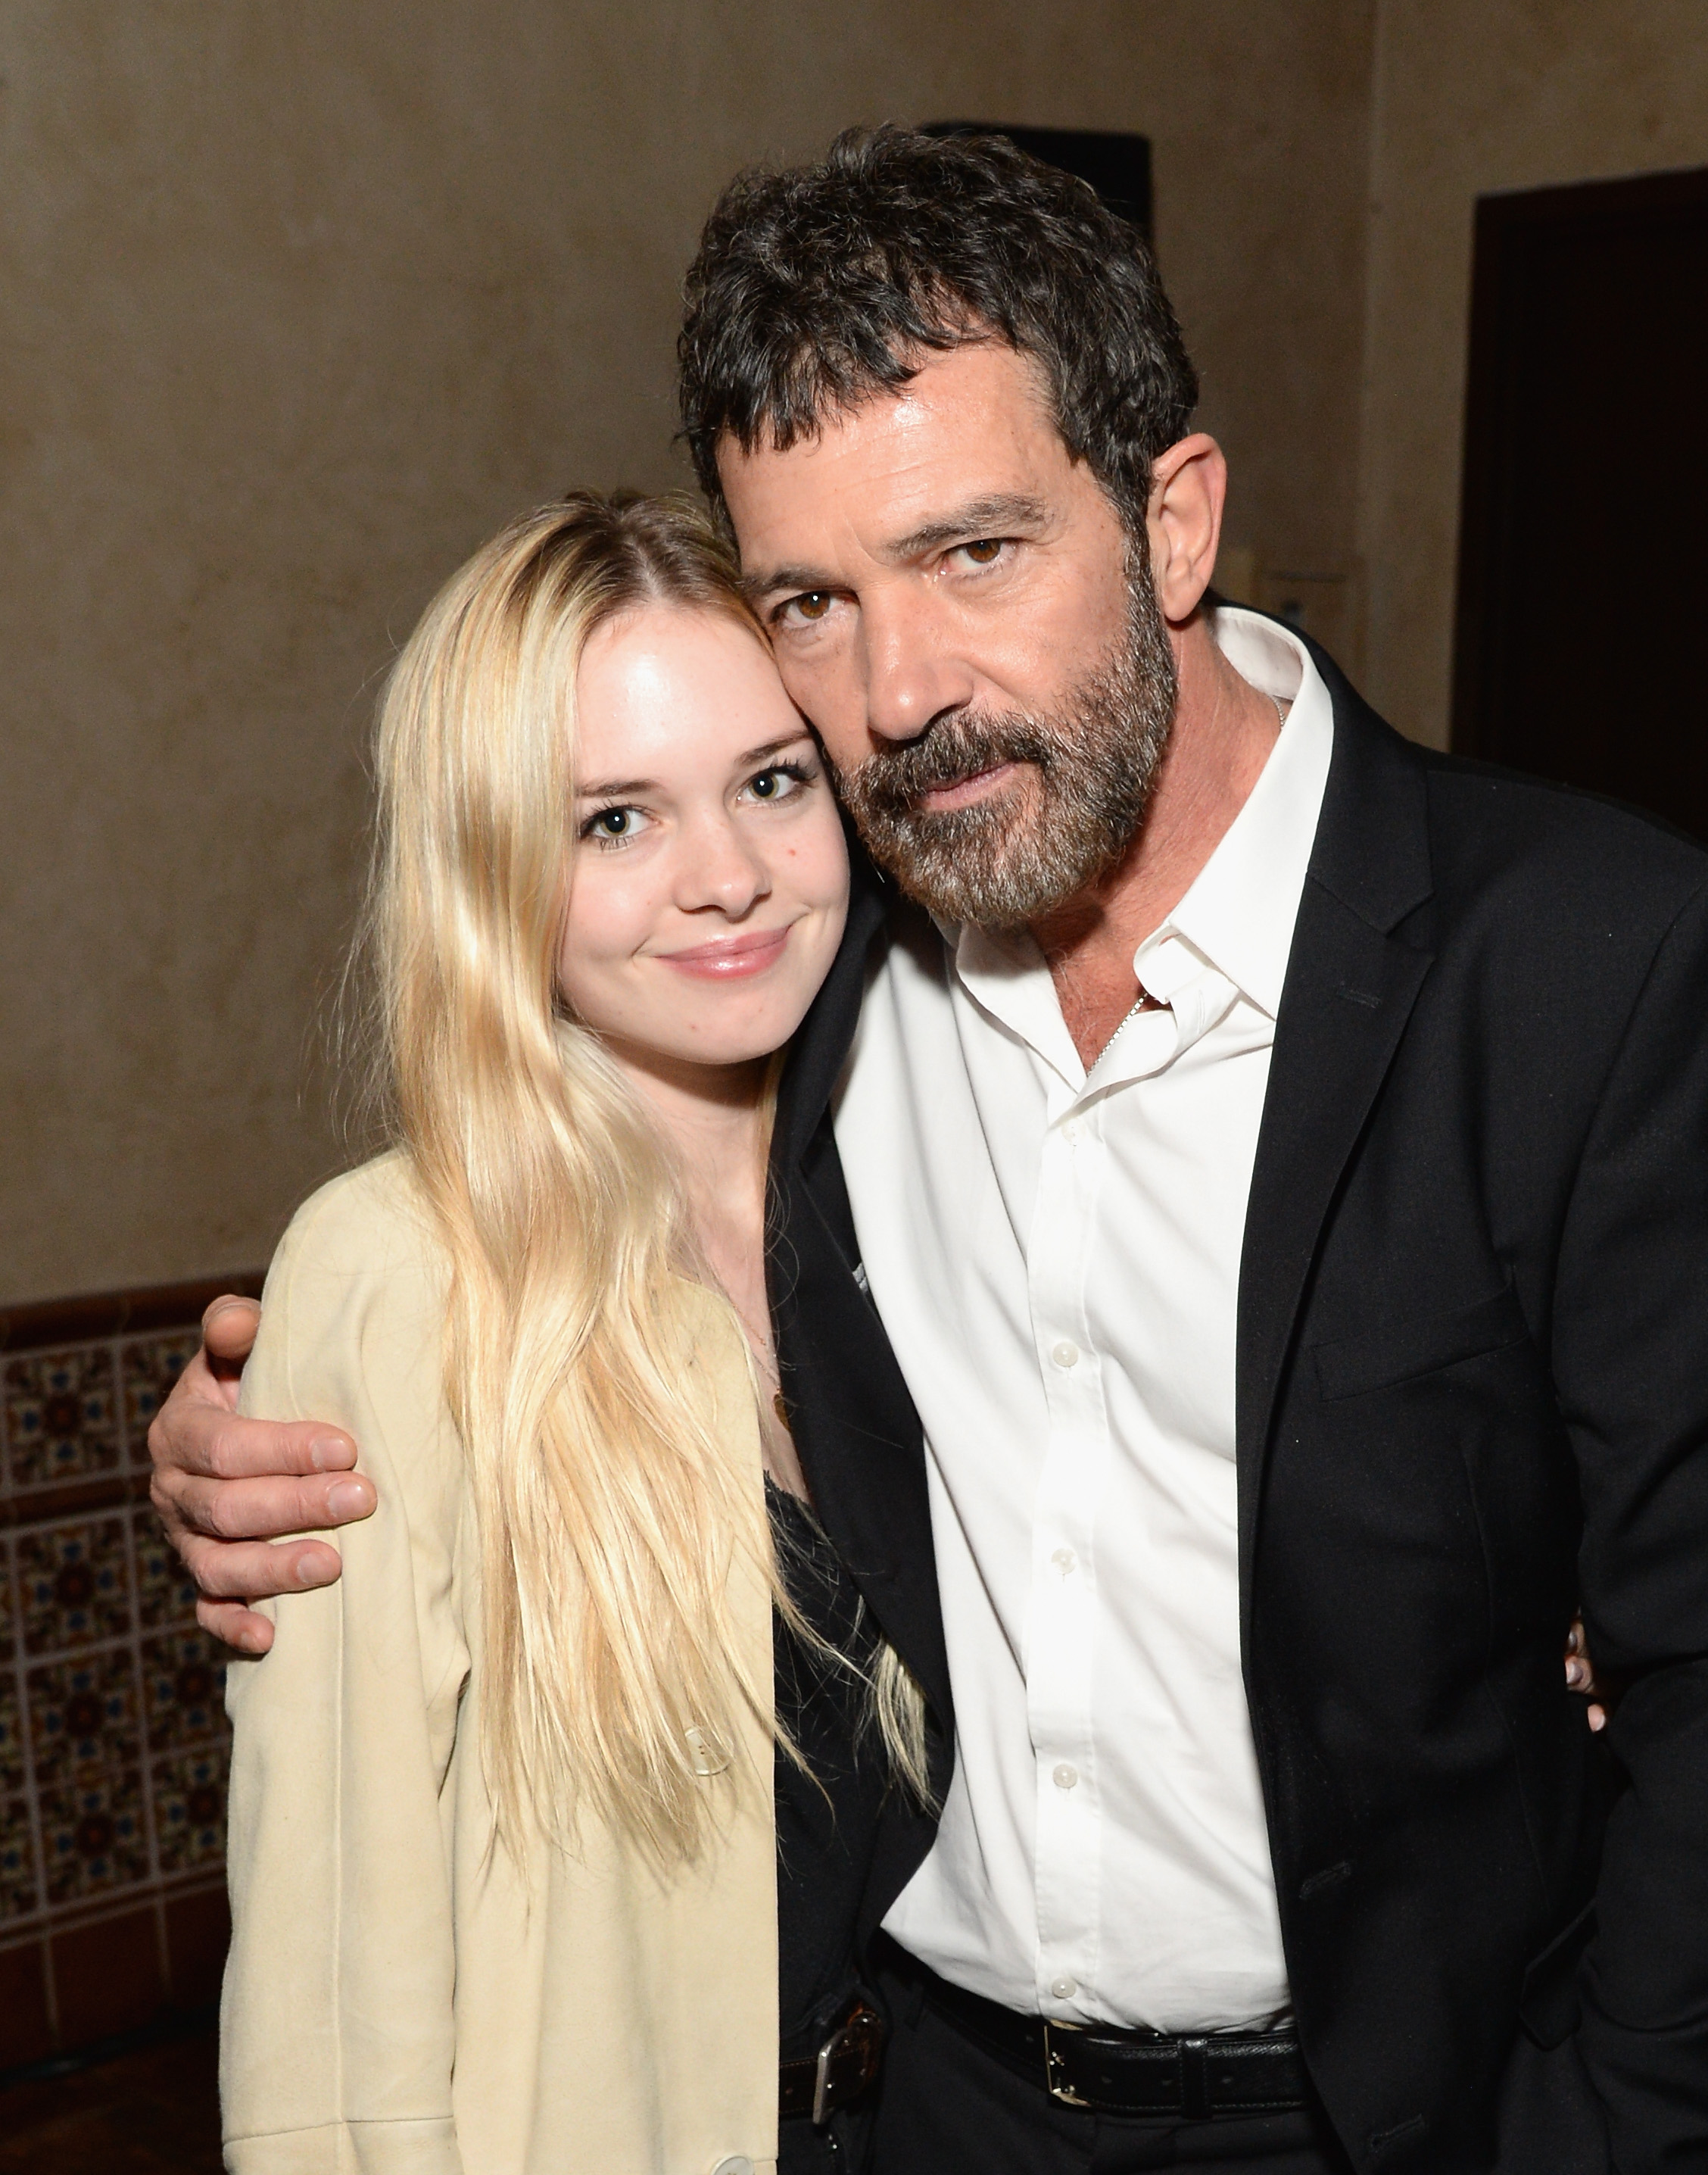 Antonio Banderas and his daughter Stella in California in 2015 | Source: Getty Images